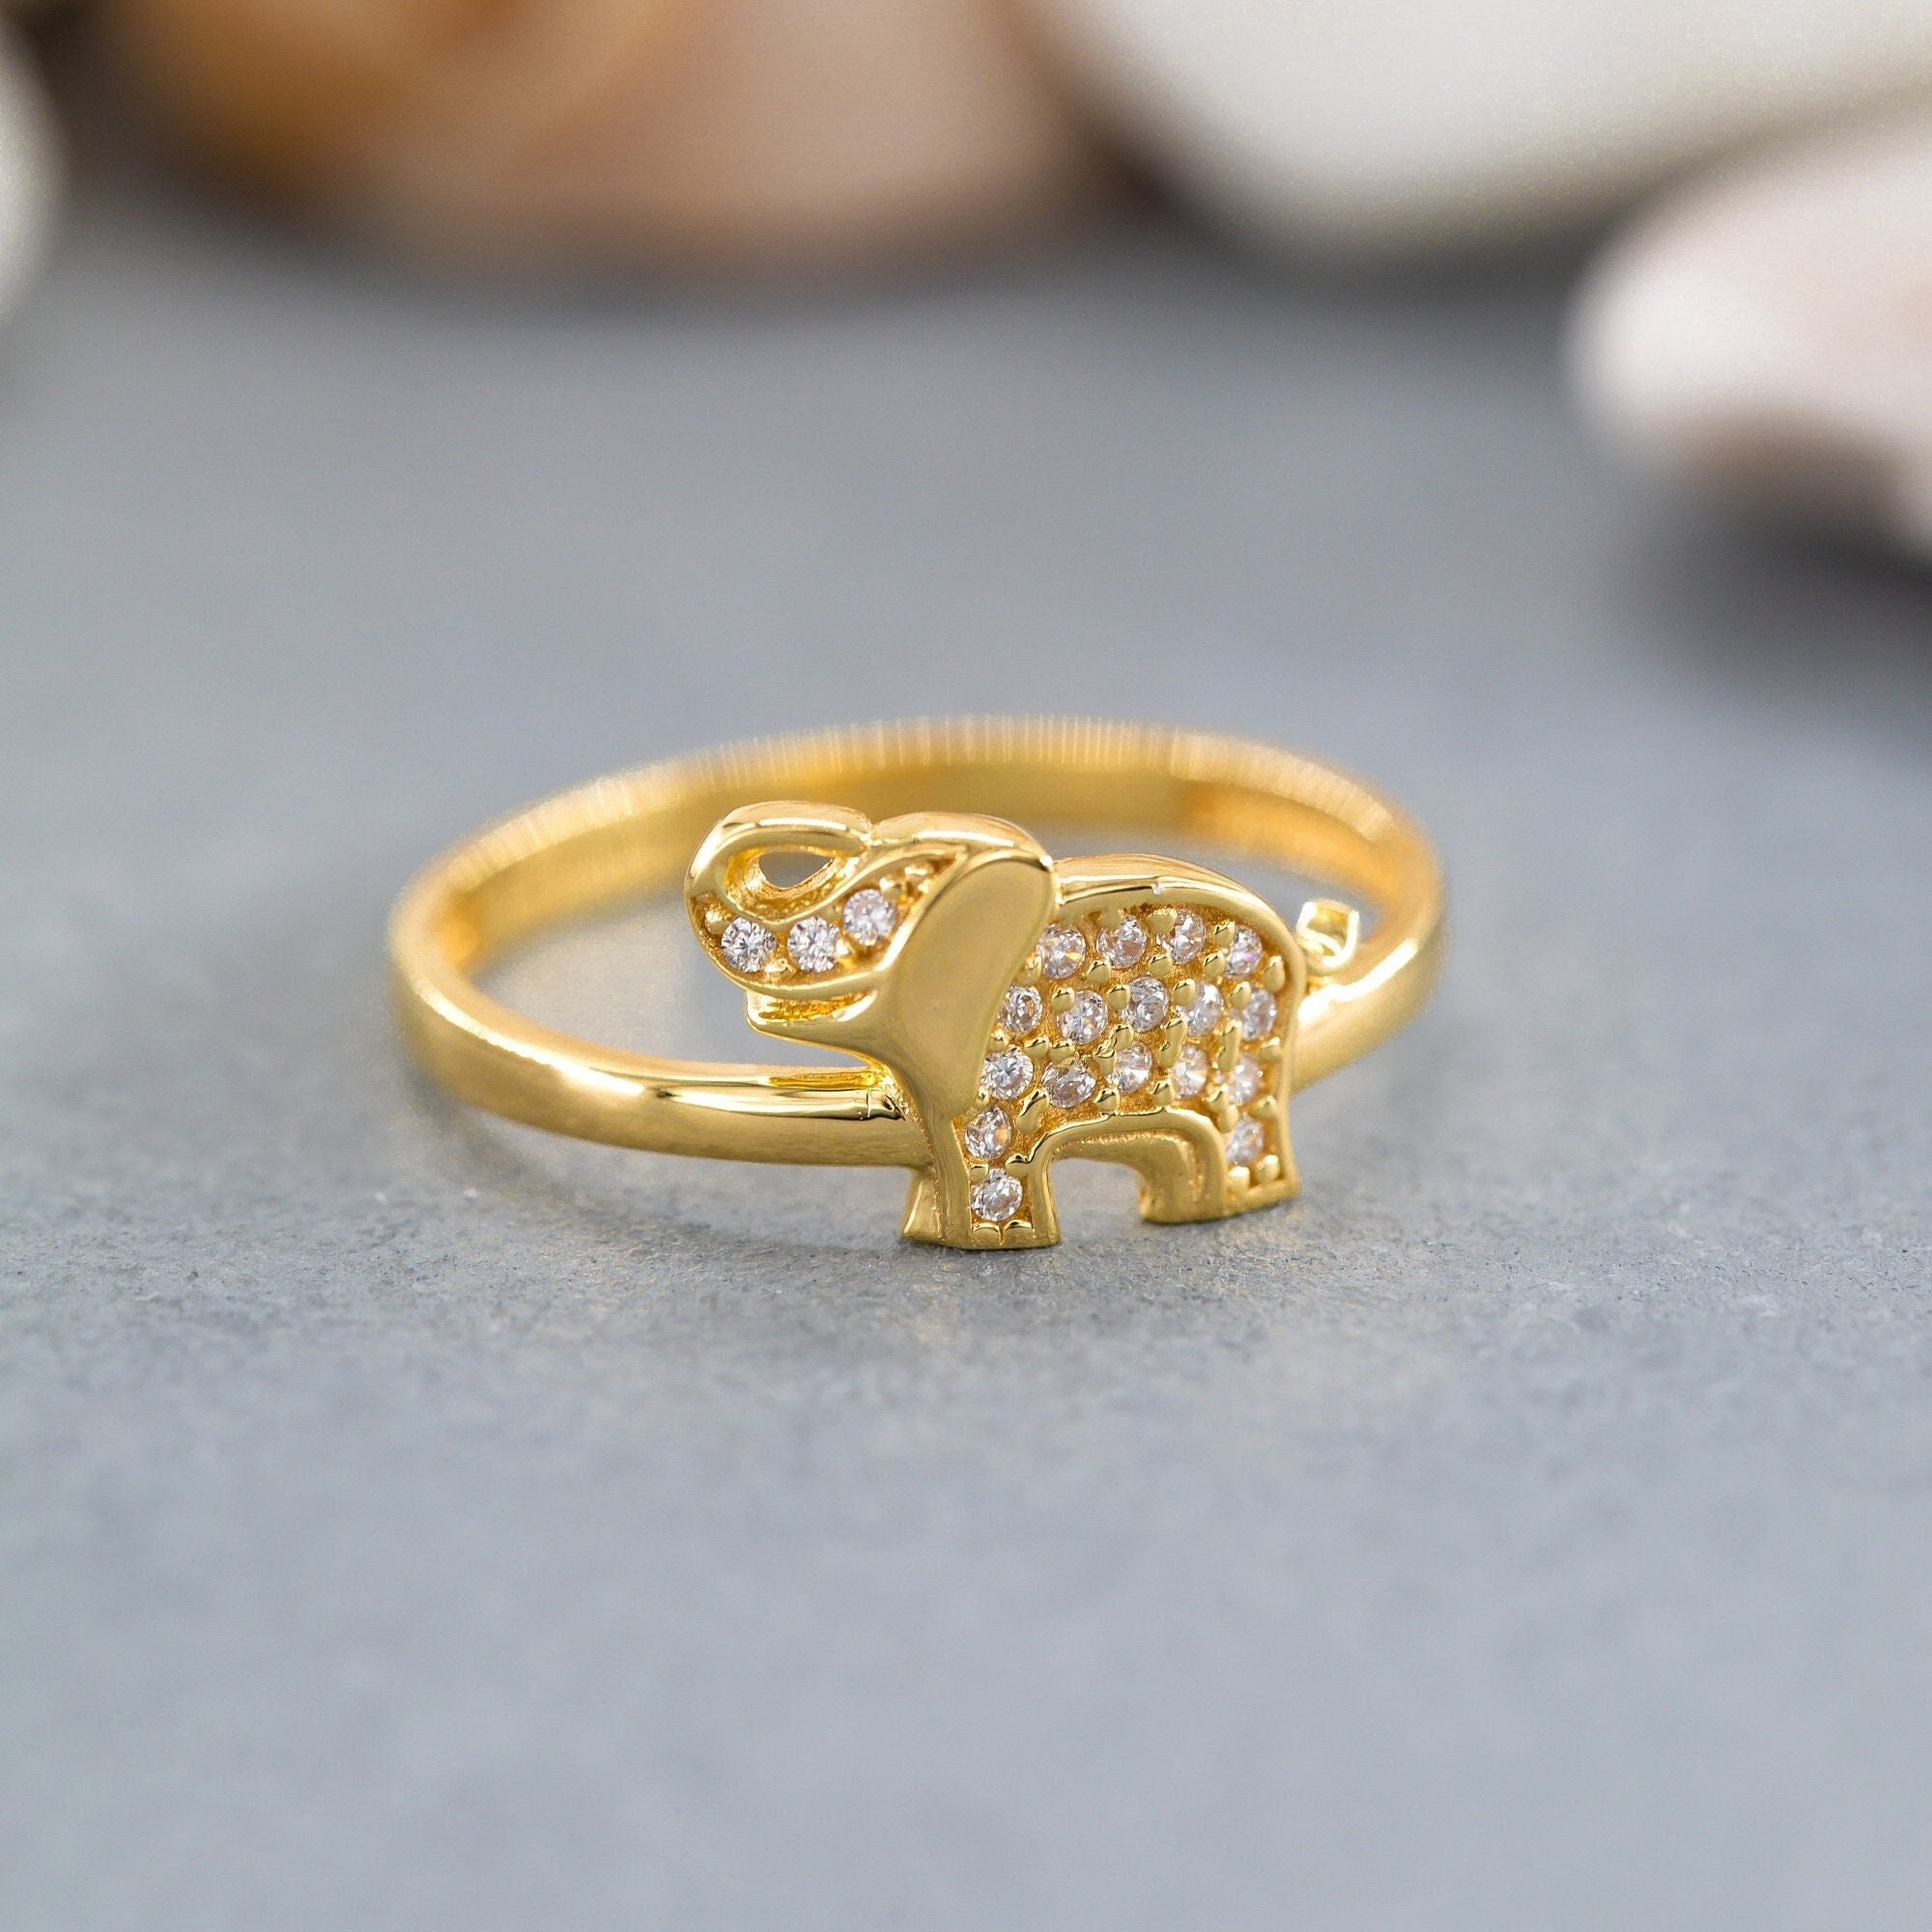 Lucky Elephant Ring, Silver Elephant Ring, Elephant Ring, Lucky Ring,  Animal Ring, Vintage Elephant, Elephant Jewelry, Elephant Gift, Elephant |  Katre Silver Jewelry Store